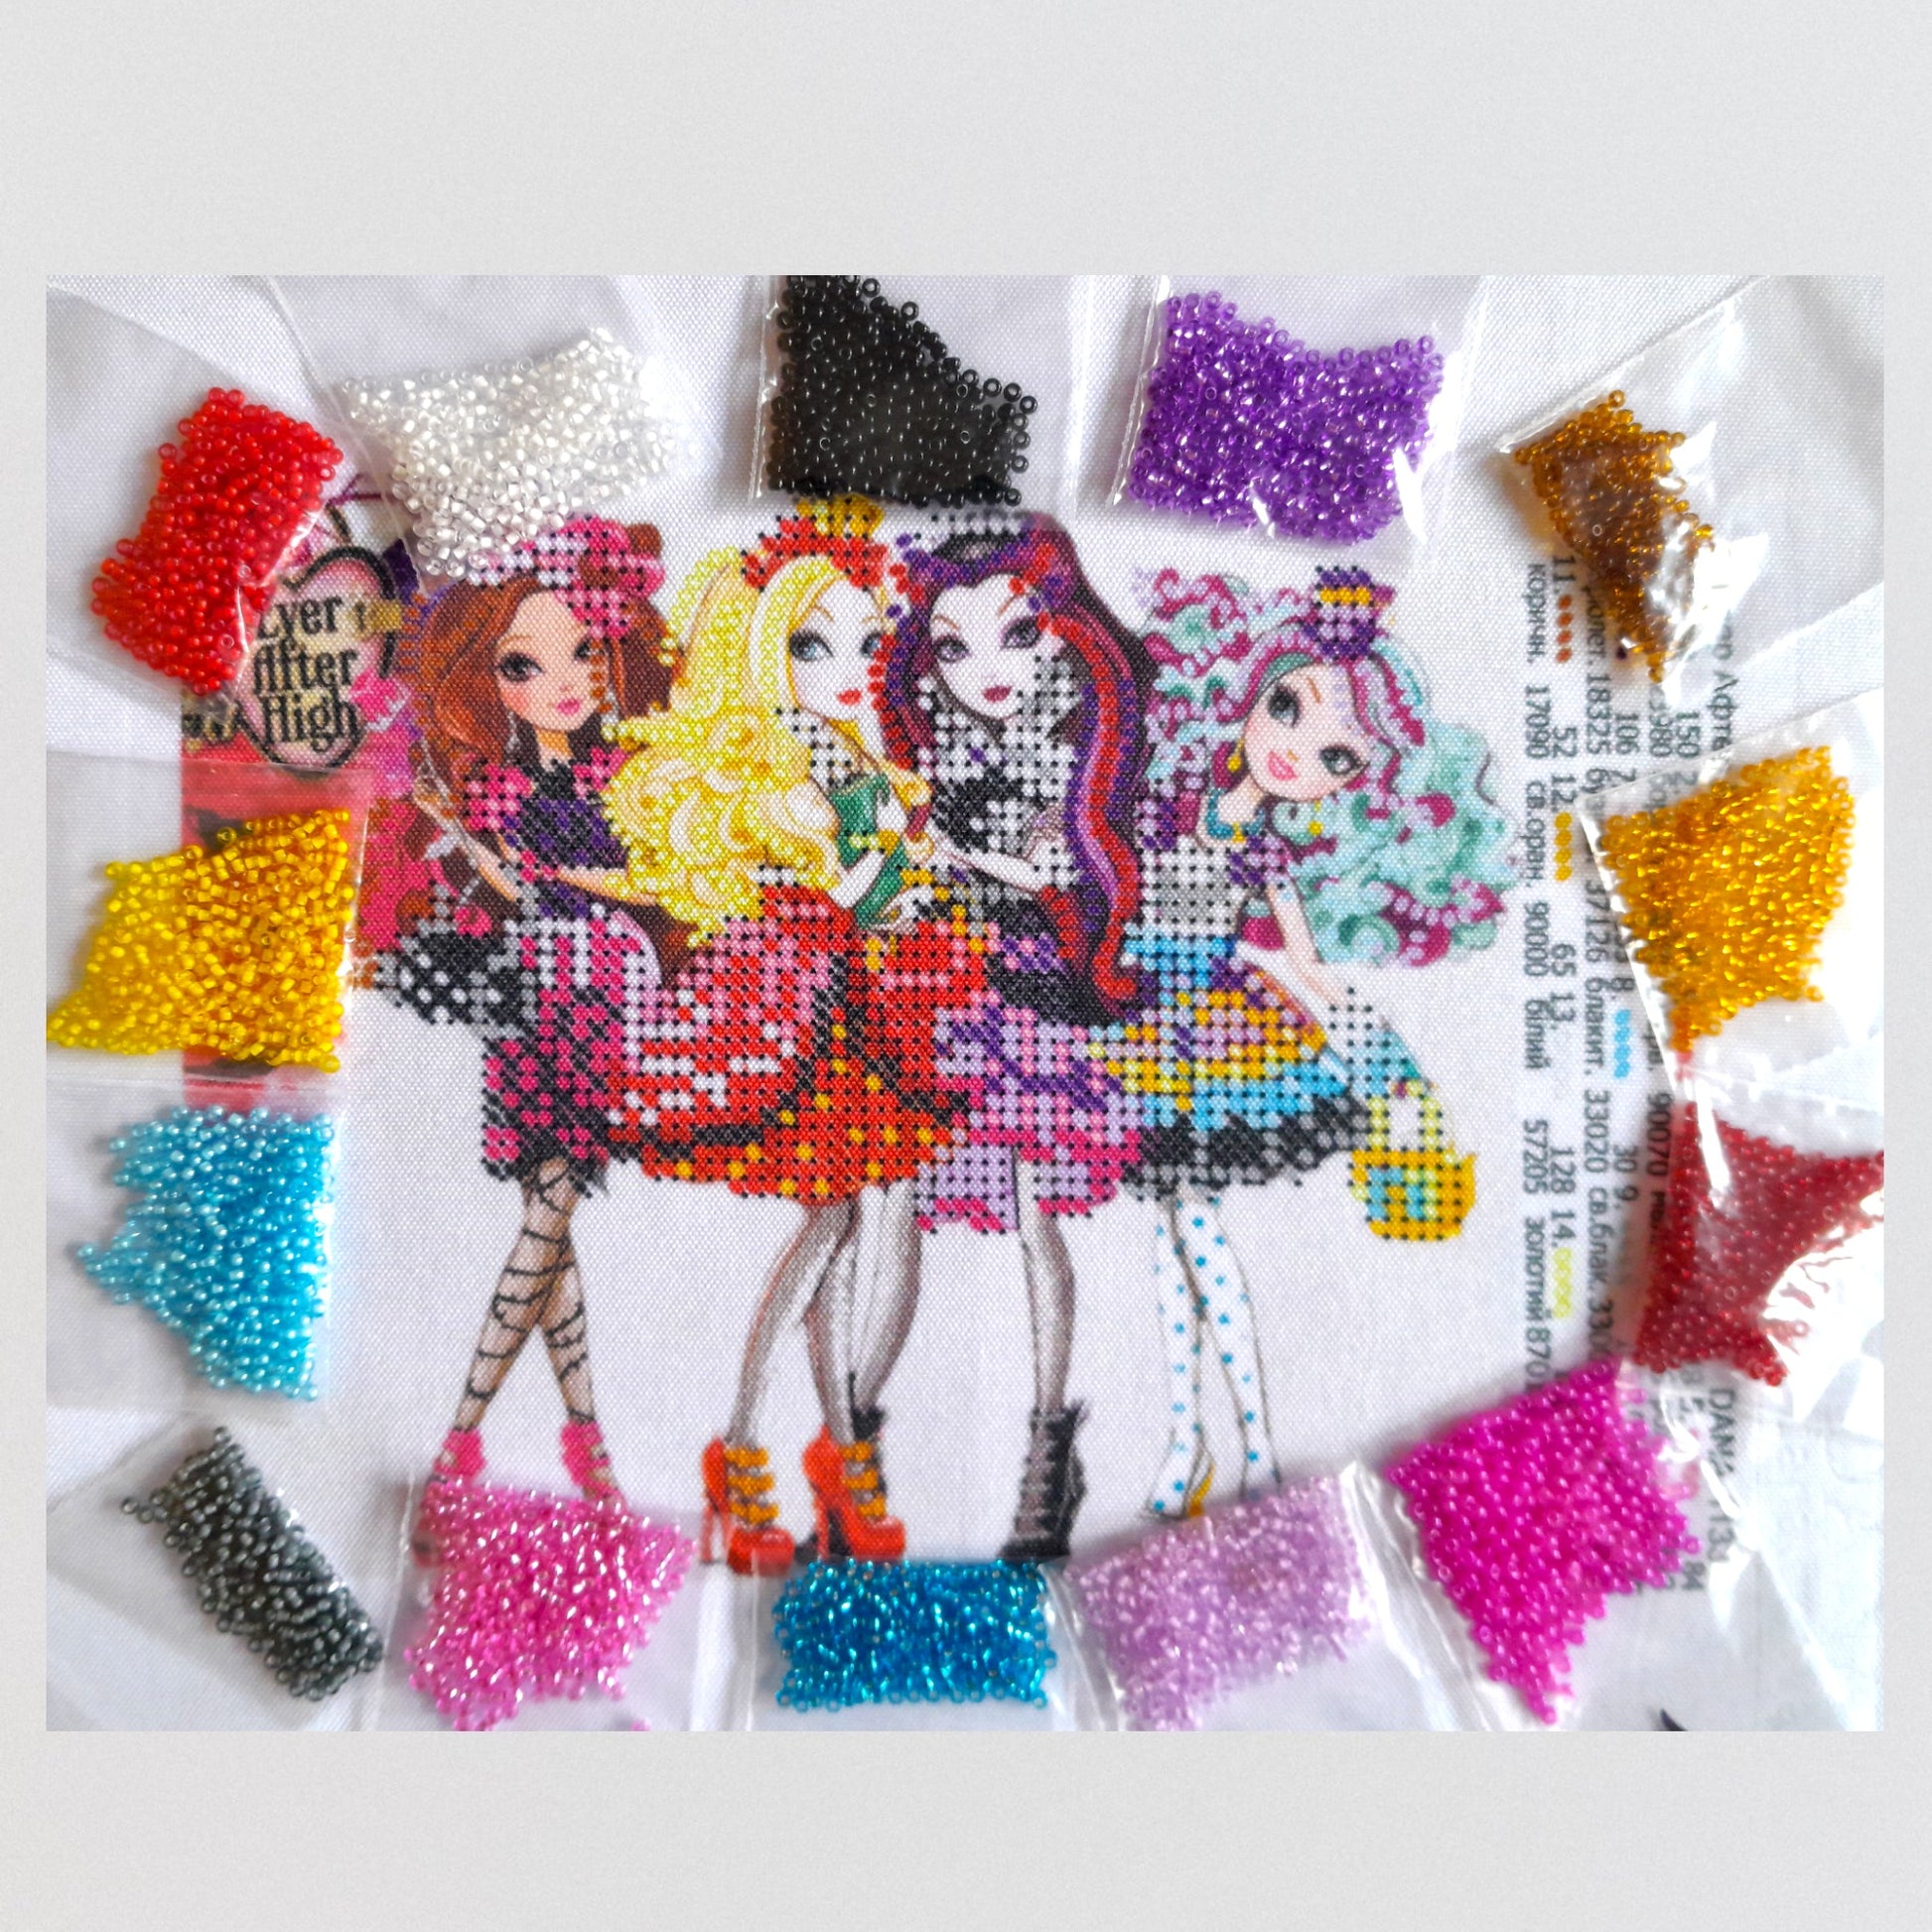 DIY Bead embroidery kit "Ever, Afteer and High". Size: 6.3-5.1in (16.8-13.7cm) - VadymShop